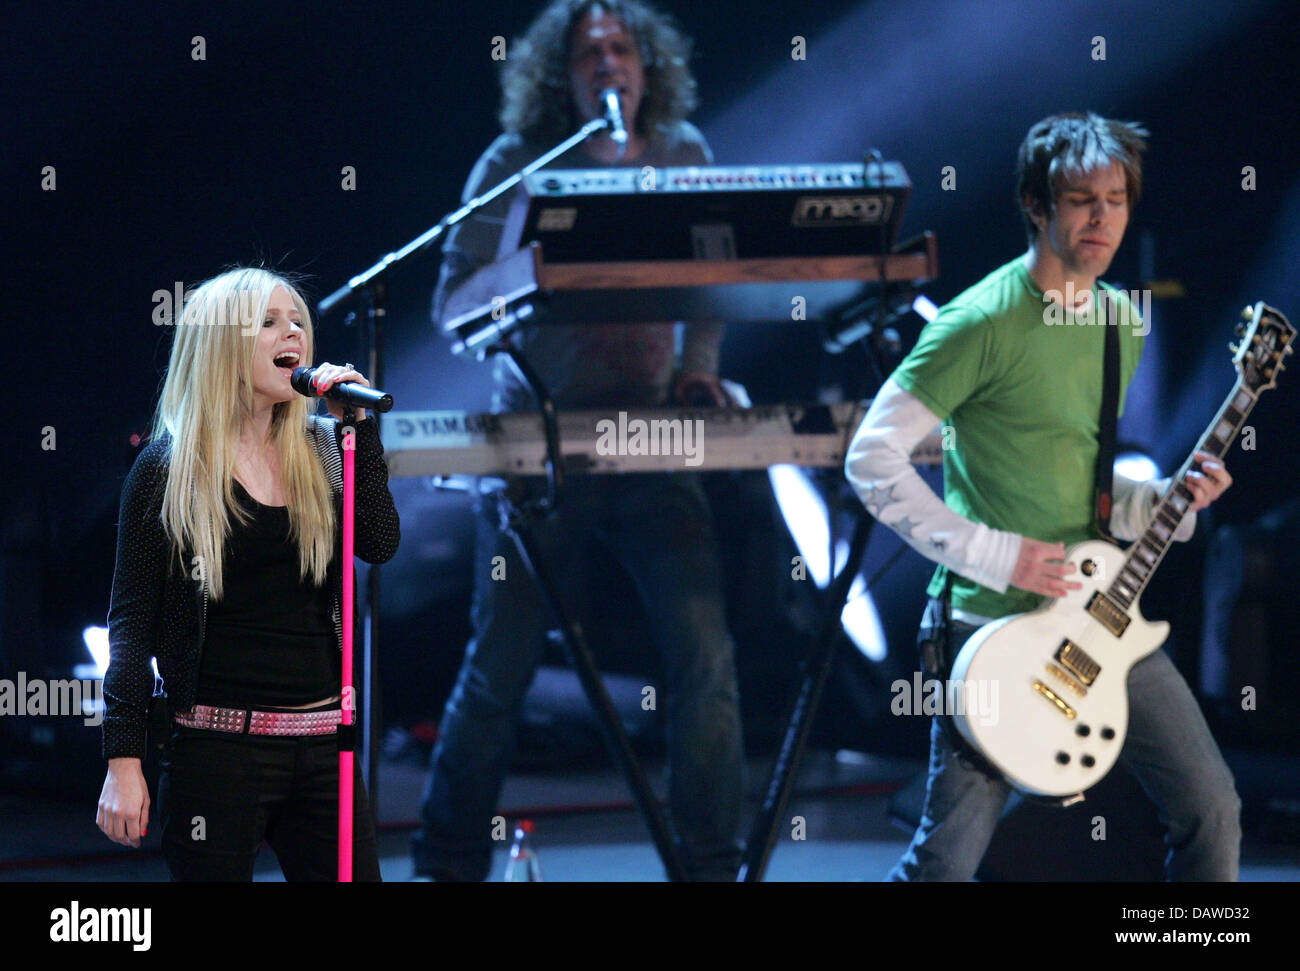 Canadian Rock Singer Avril Lavigne L Performs With Her Band In The Stock Photo Alamy